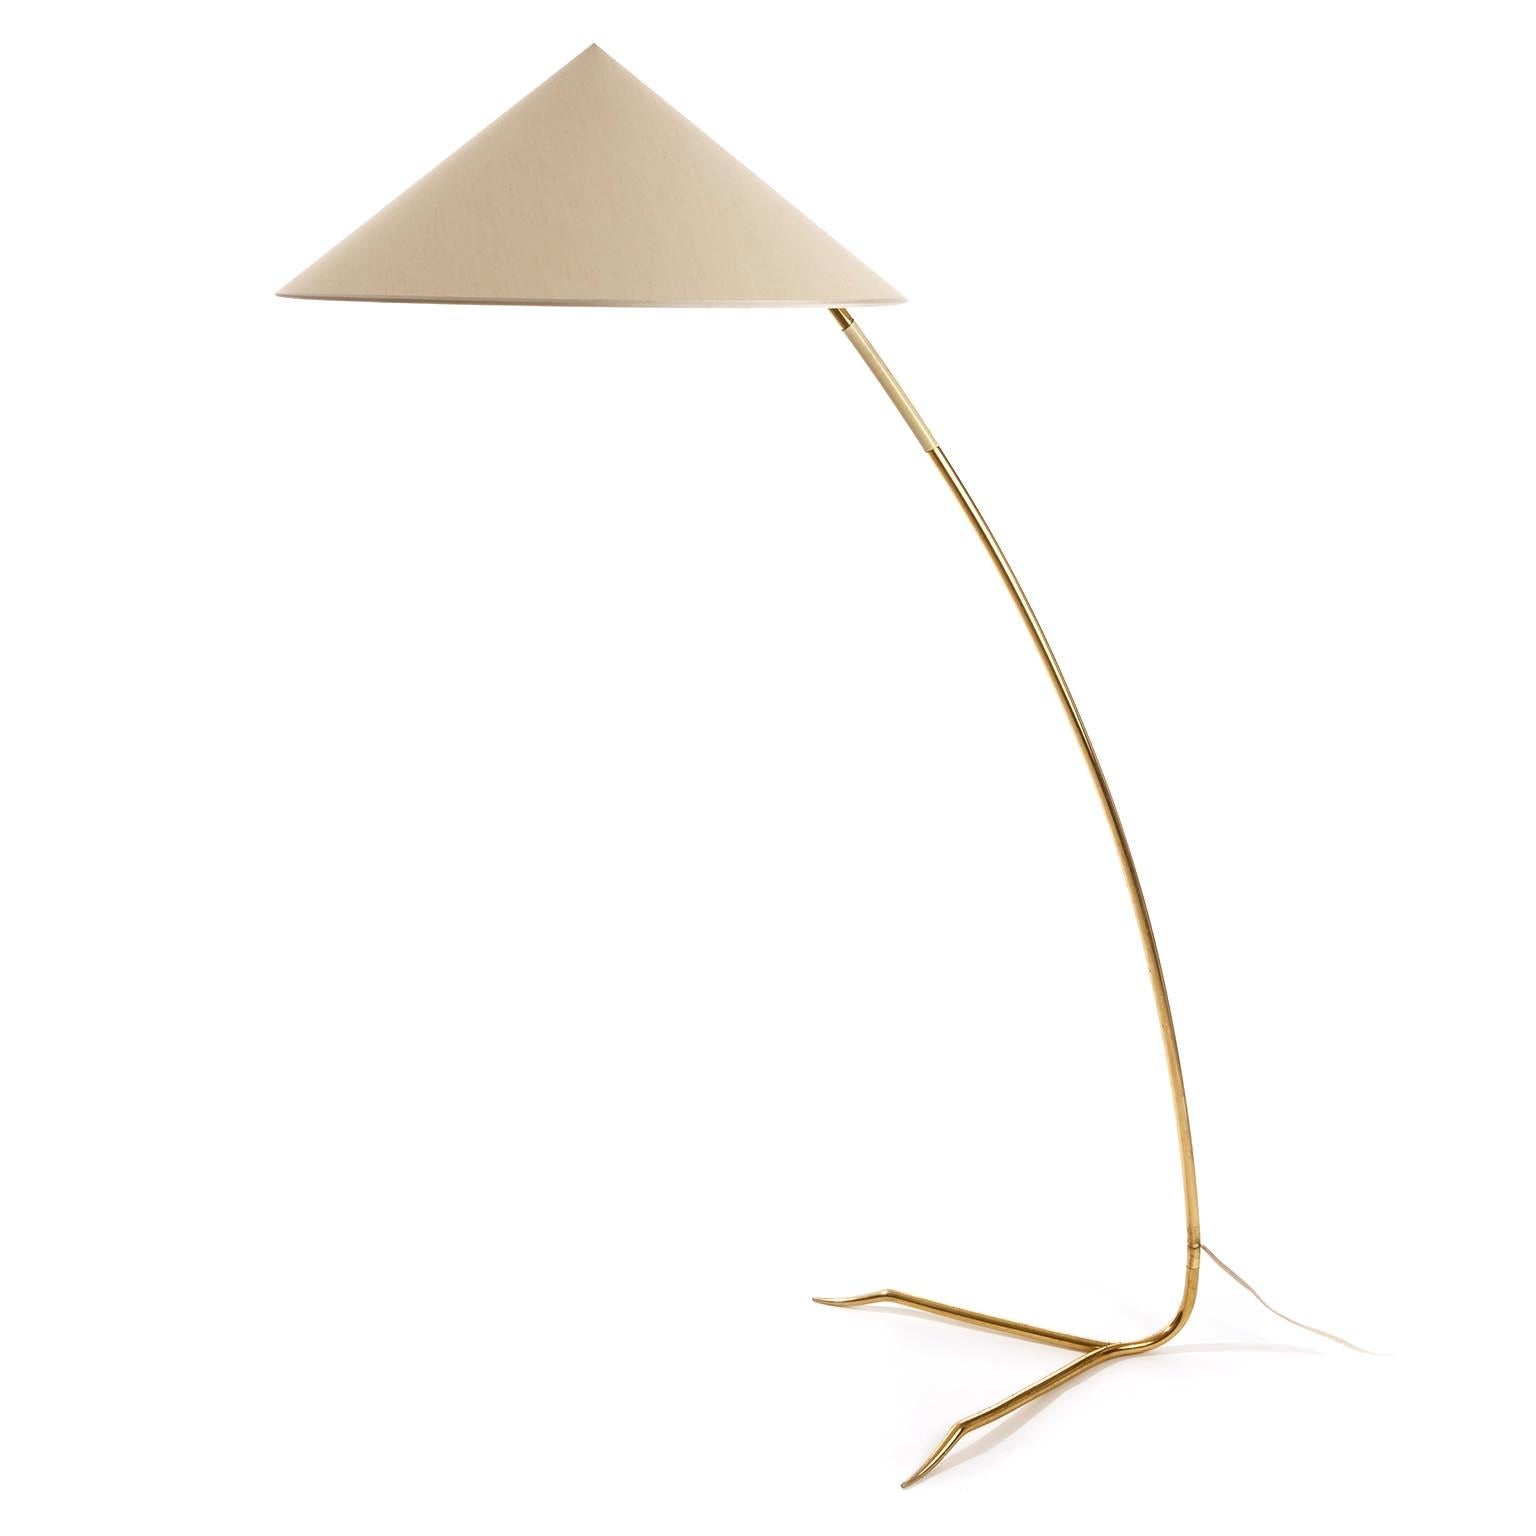 One of two gorgeous and rare floor lights with model name 'Sumatra' by Rupert Nikoll, Austria, manufactured in midcentury, circa 1950s.
A cone shaped lamp shade sits on a solid brass stand with a white plastic handle and a straddled base.
The